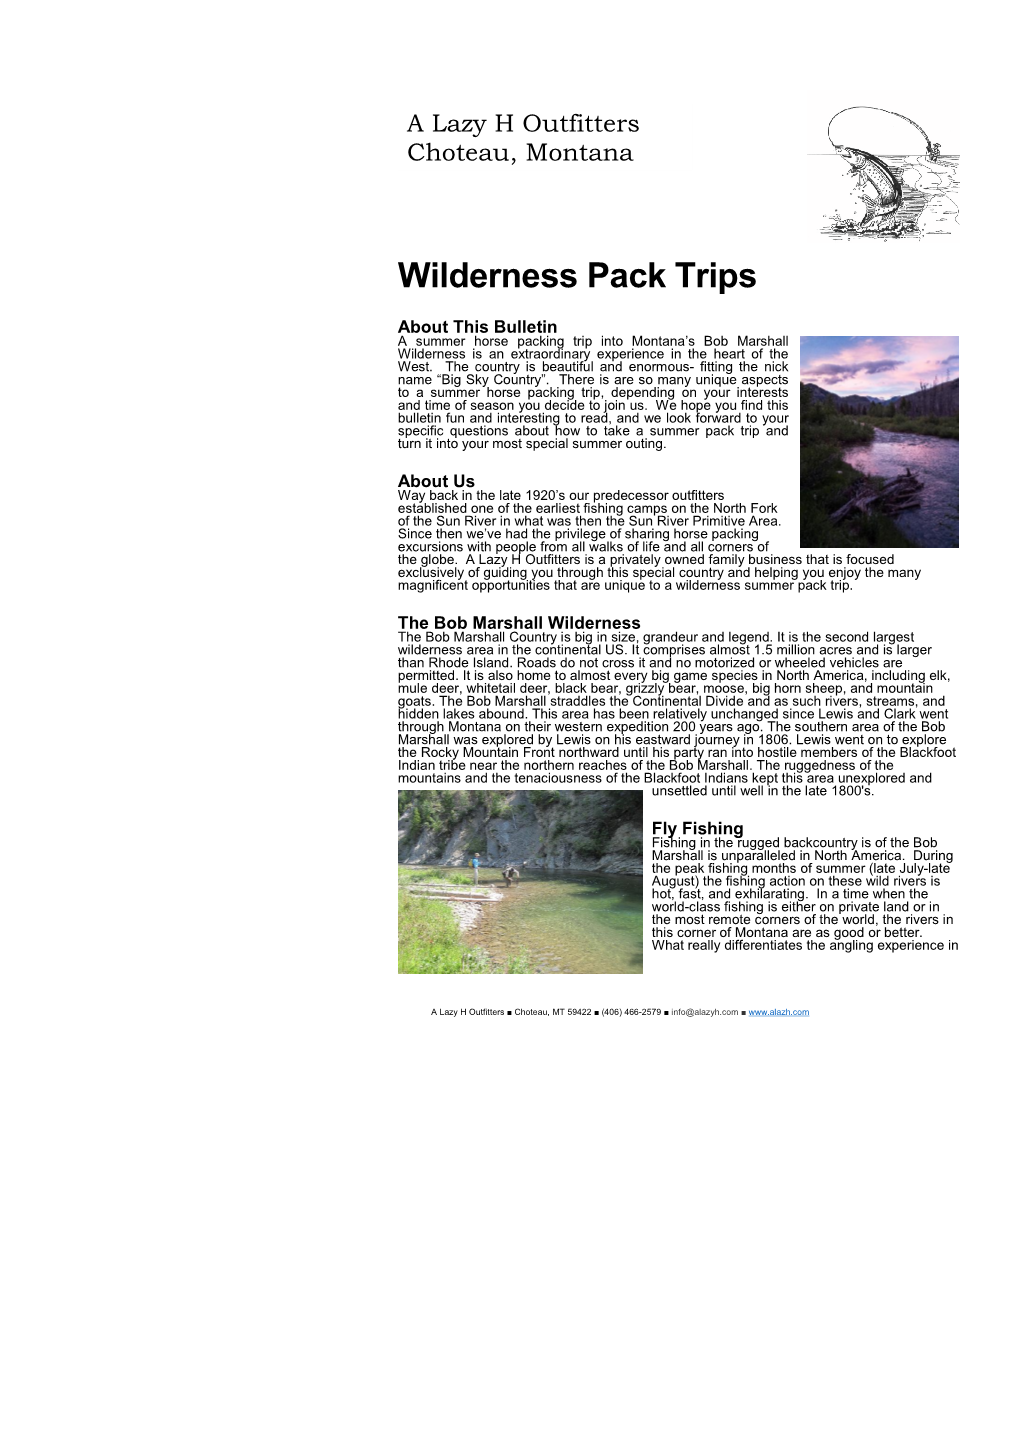 Wilderness Pack Trips